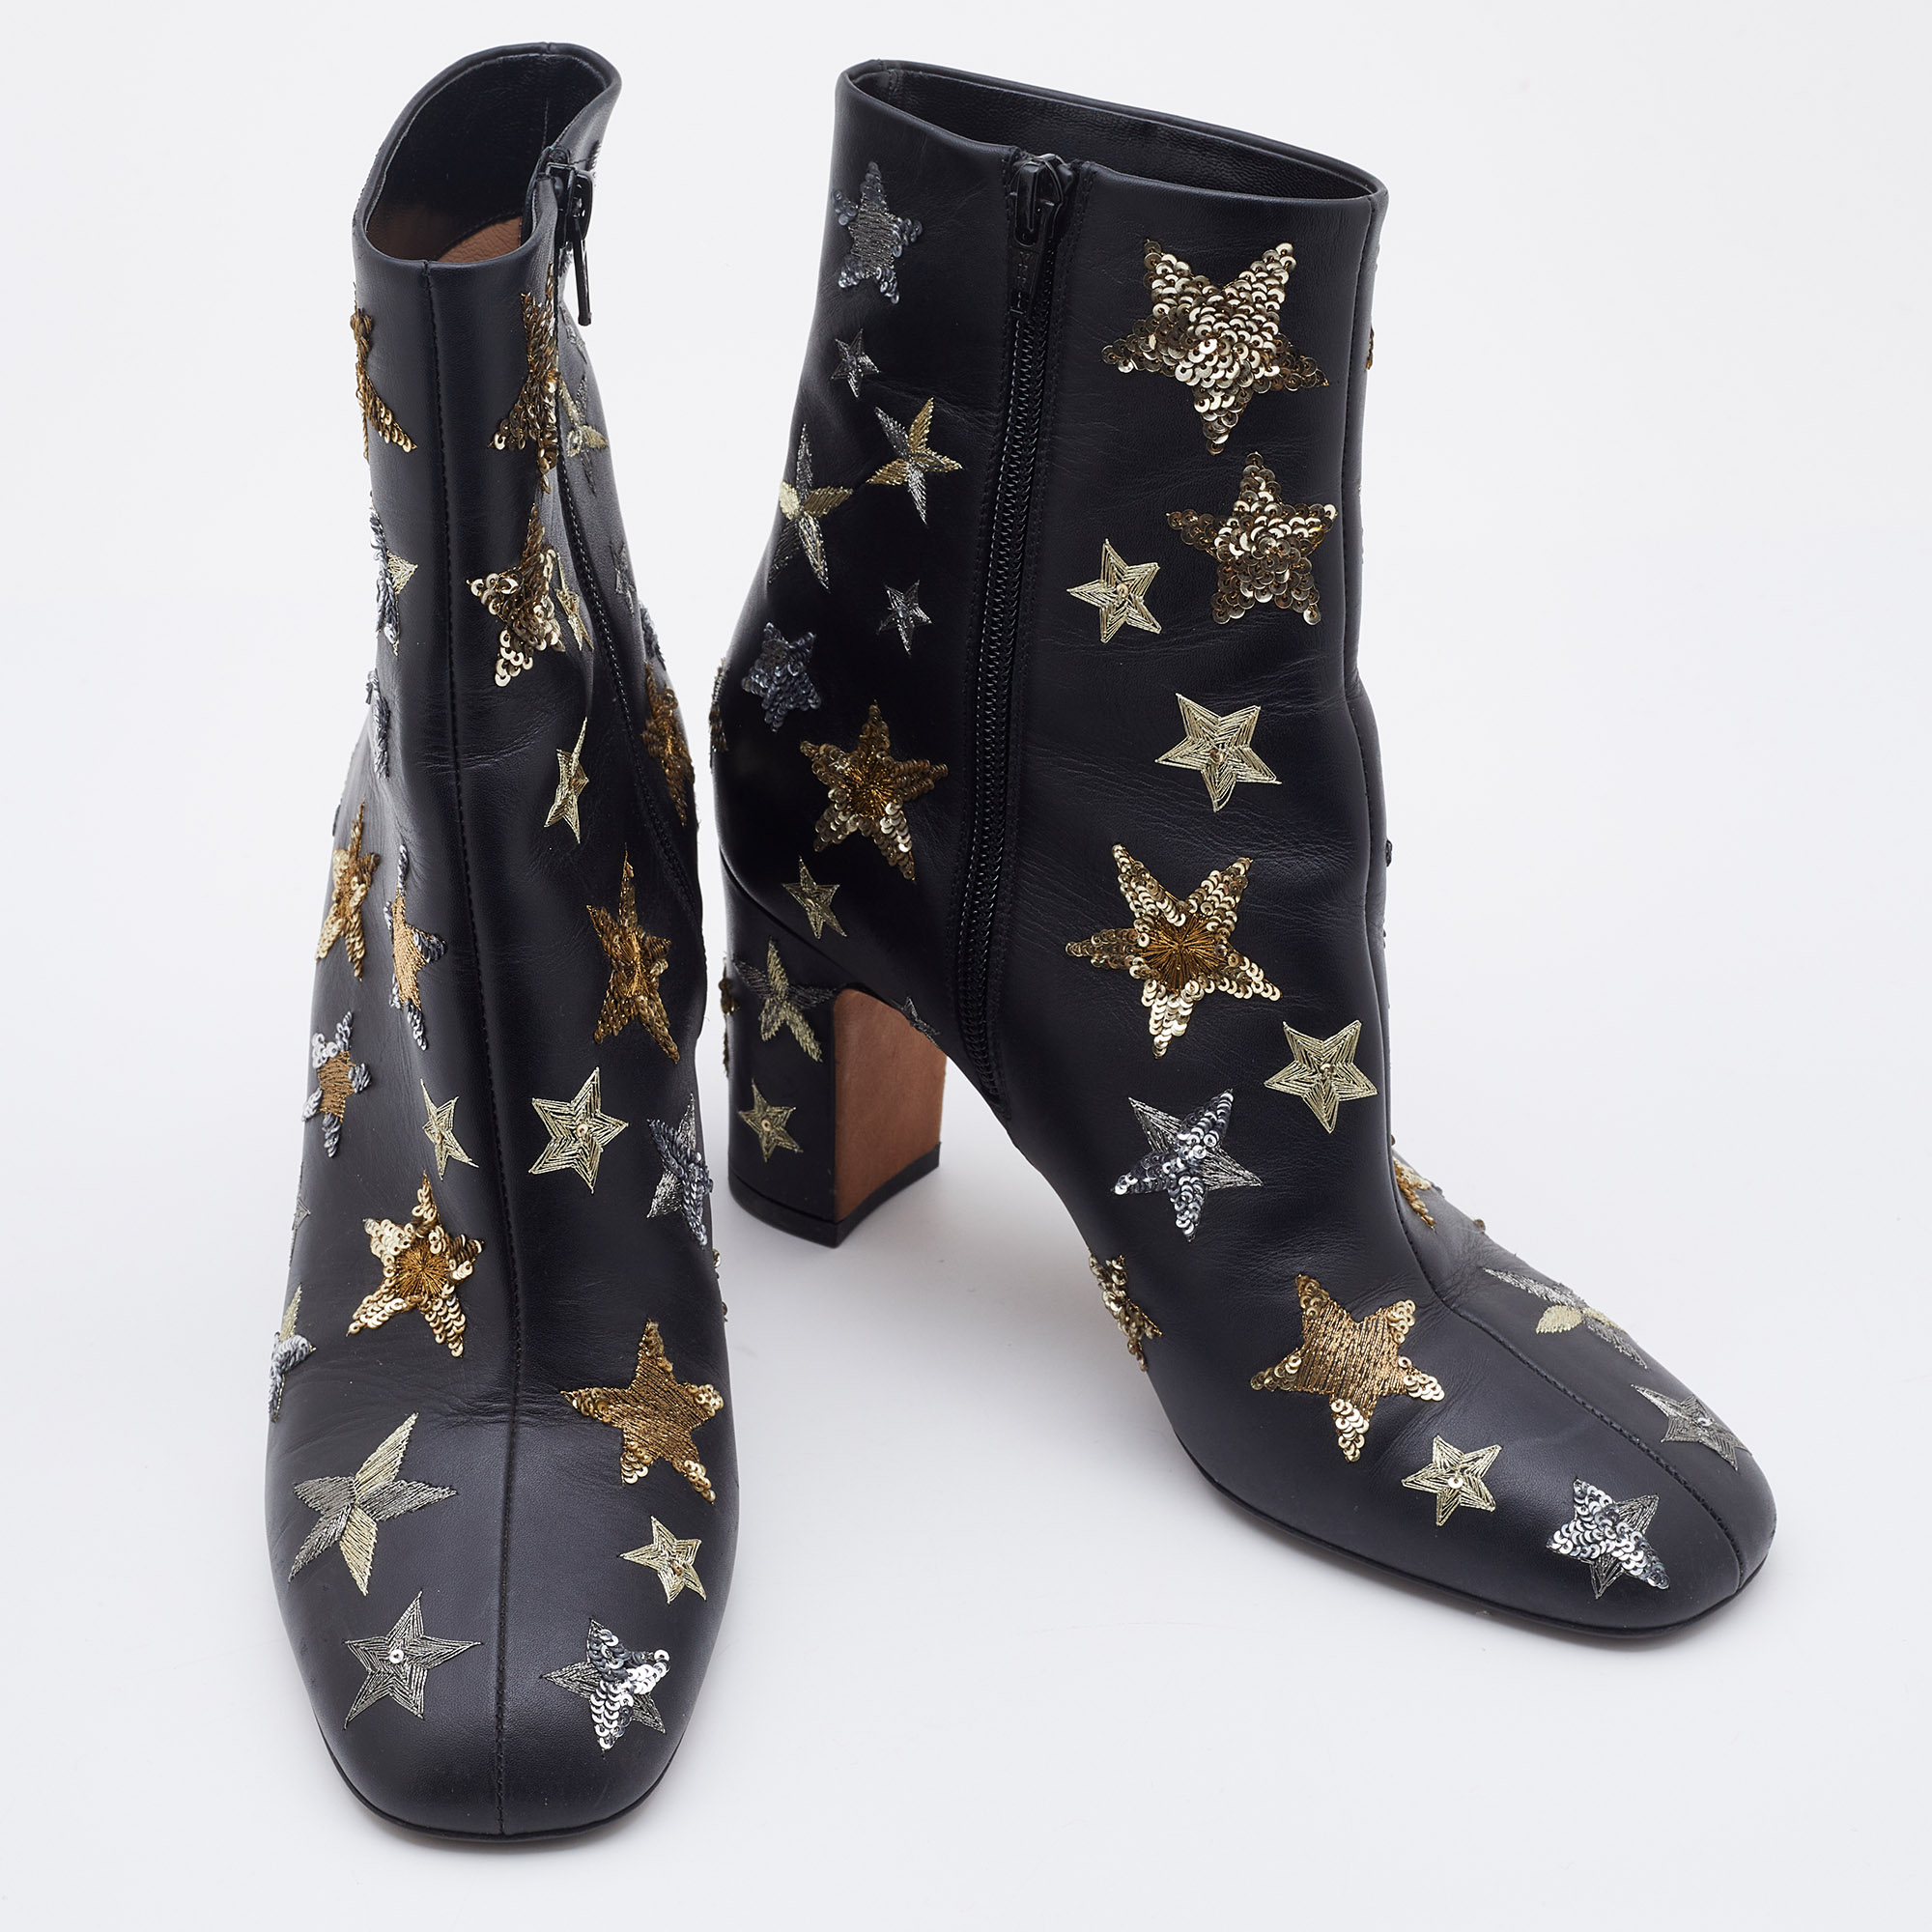 Valentino Black Leather Embroidered Sequin/Stars Ankle Length Boots Size 39